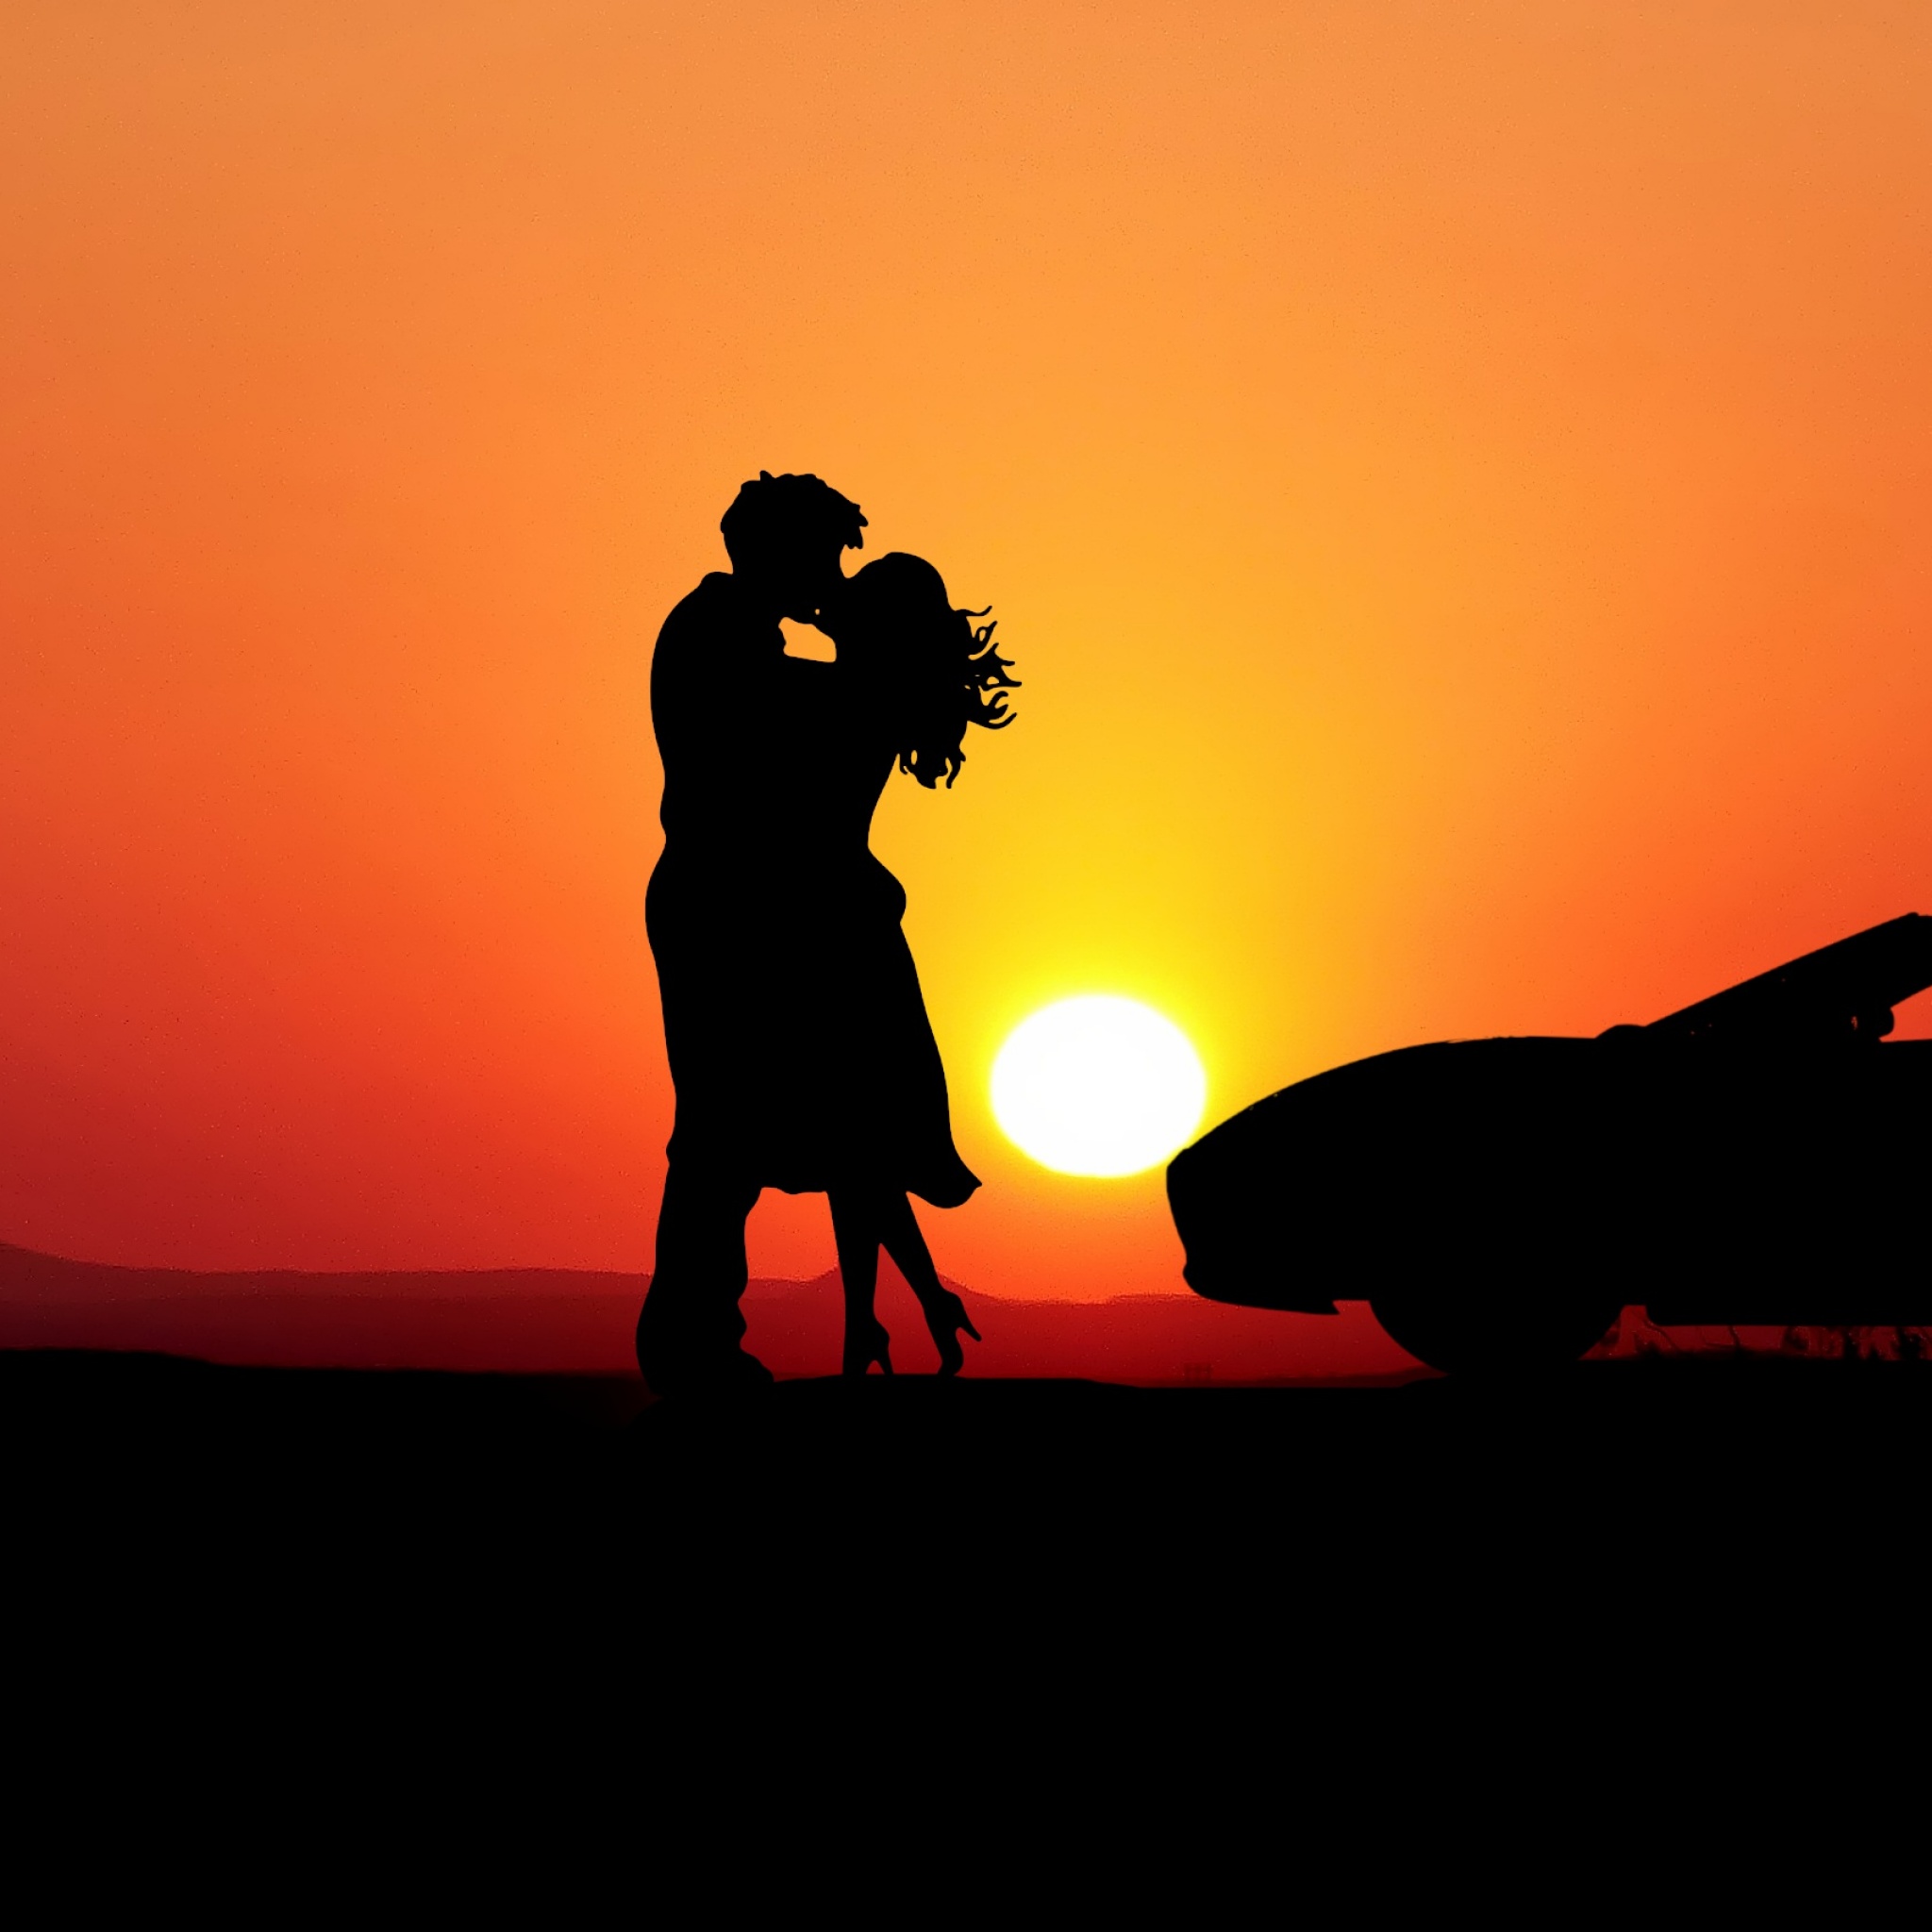 Couple Wallpaper 4K, Romantic kiss, Sunset, Silhouette, Car, Together